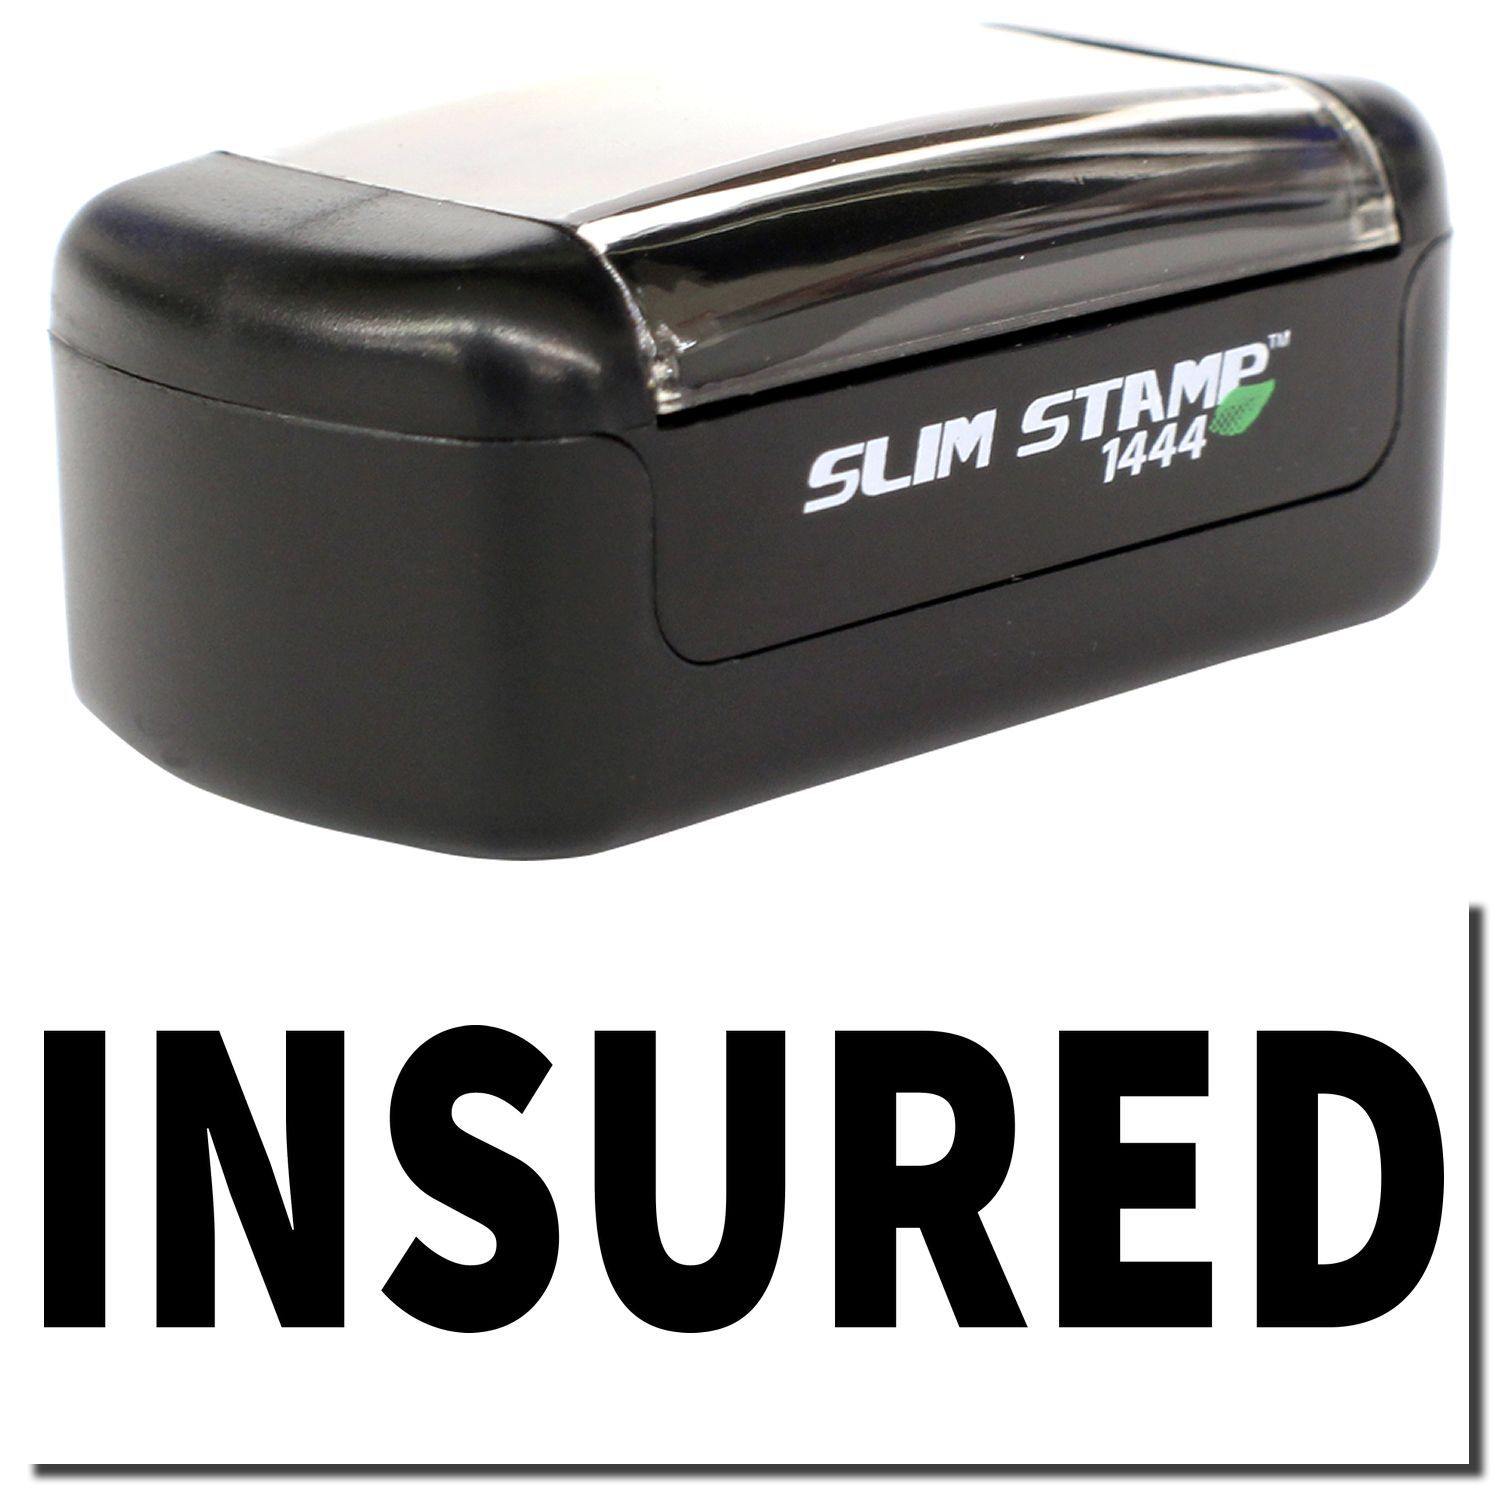 A stock office pre-inked stamp with a stamped image showing how the text "INSURED" is displayed after stamping.